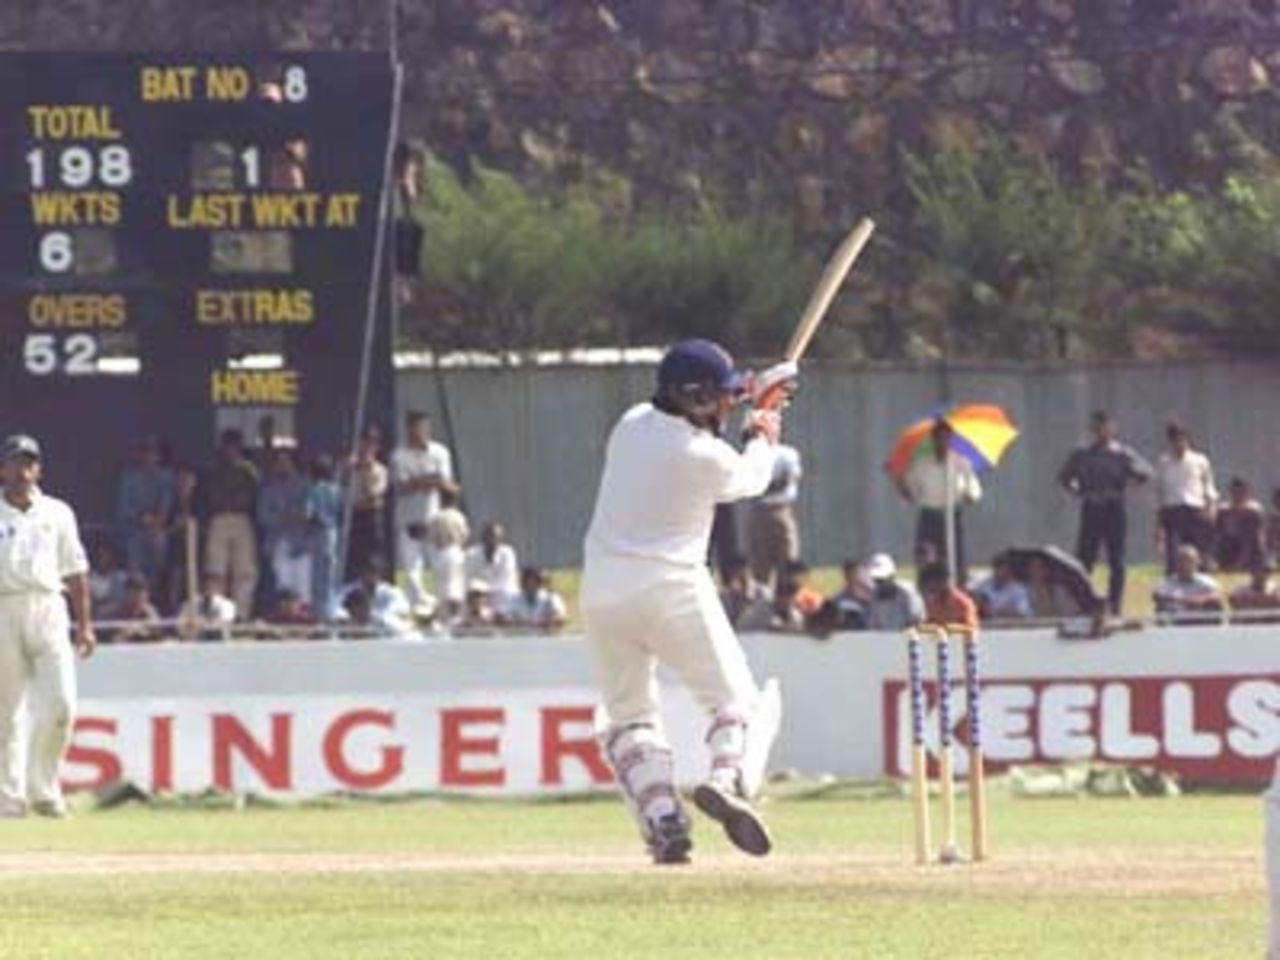 Arjuna reaches his half century with a top edged pull, Pakistan v Sri Lanka, 2nd Test at Galle, 21-25 June 2000